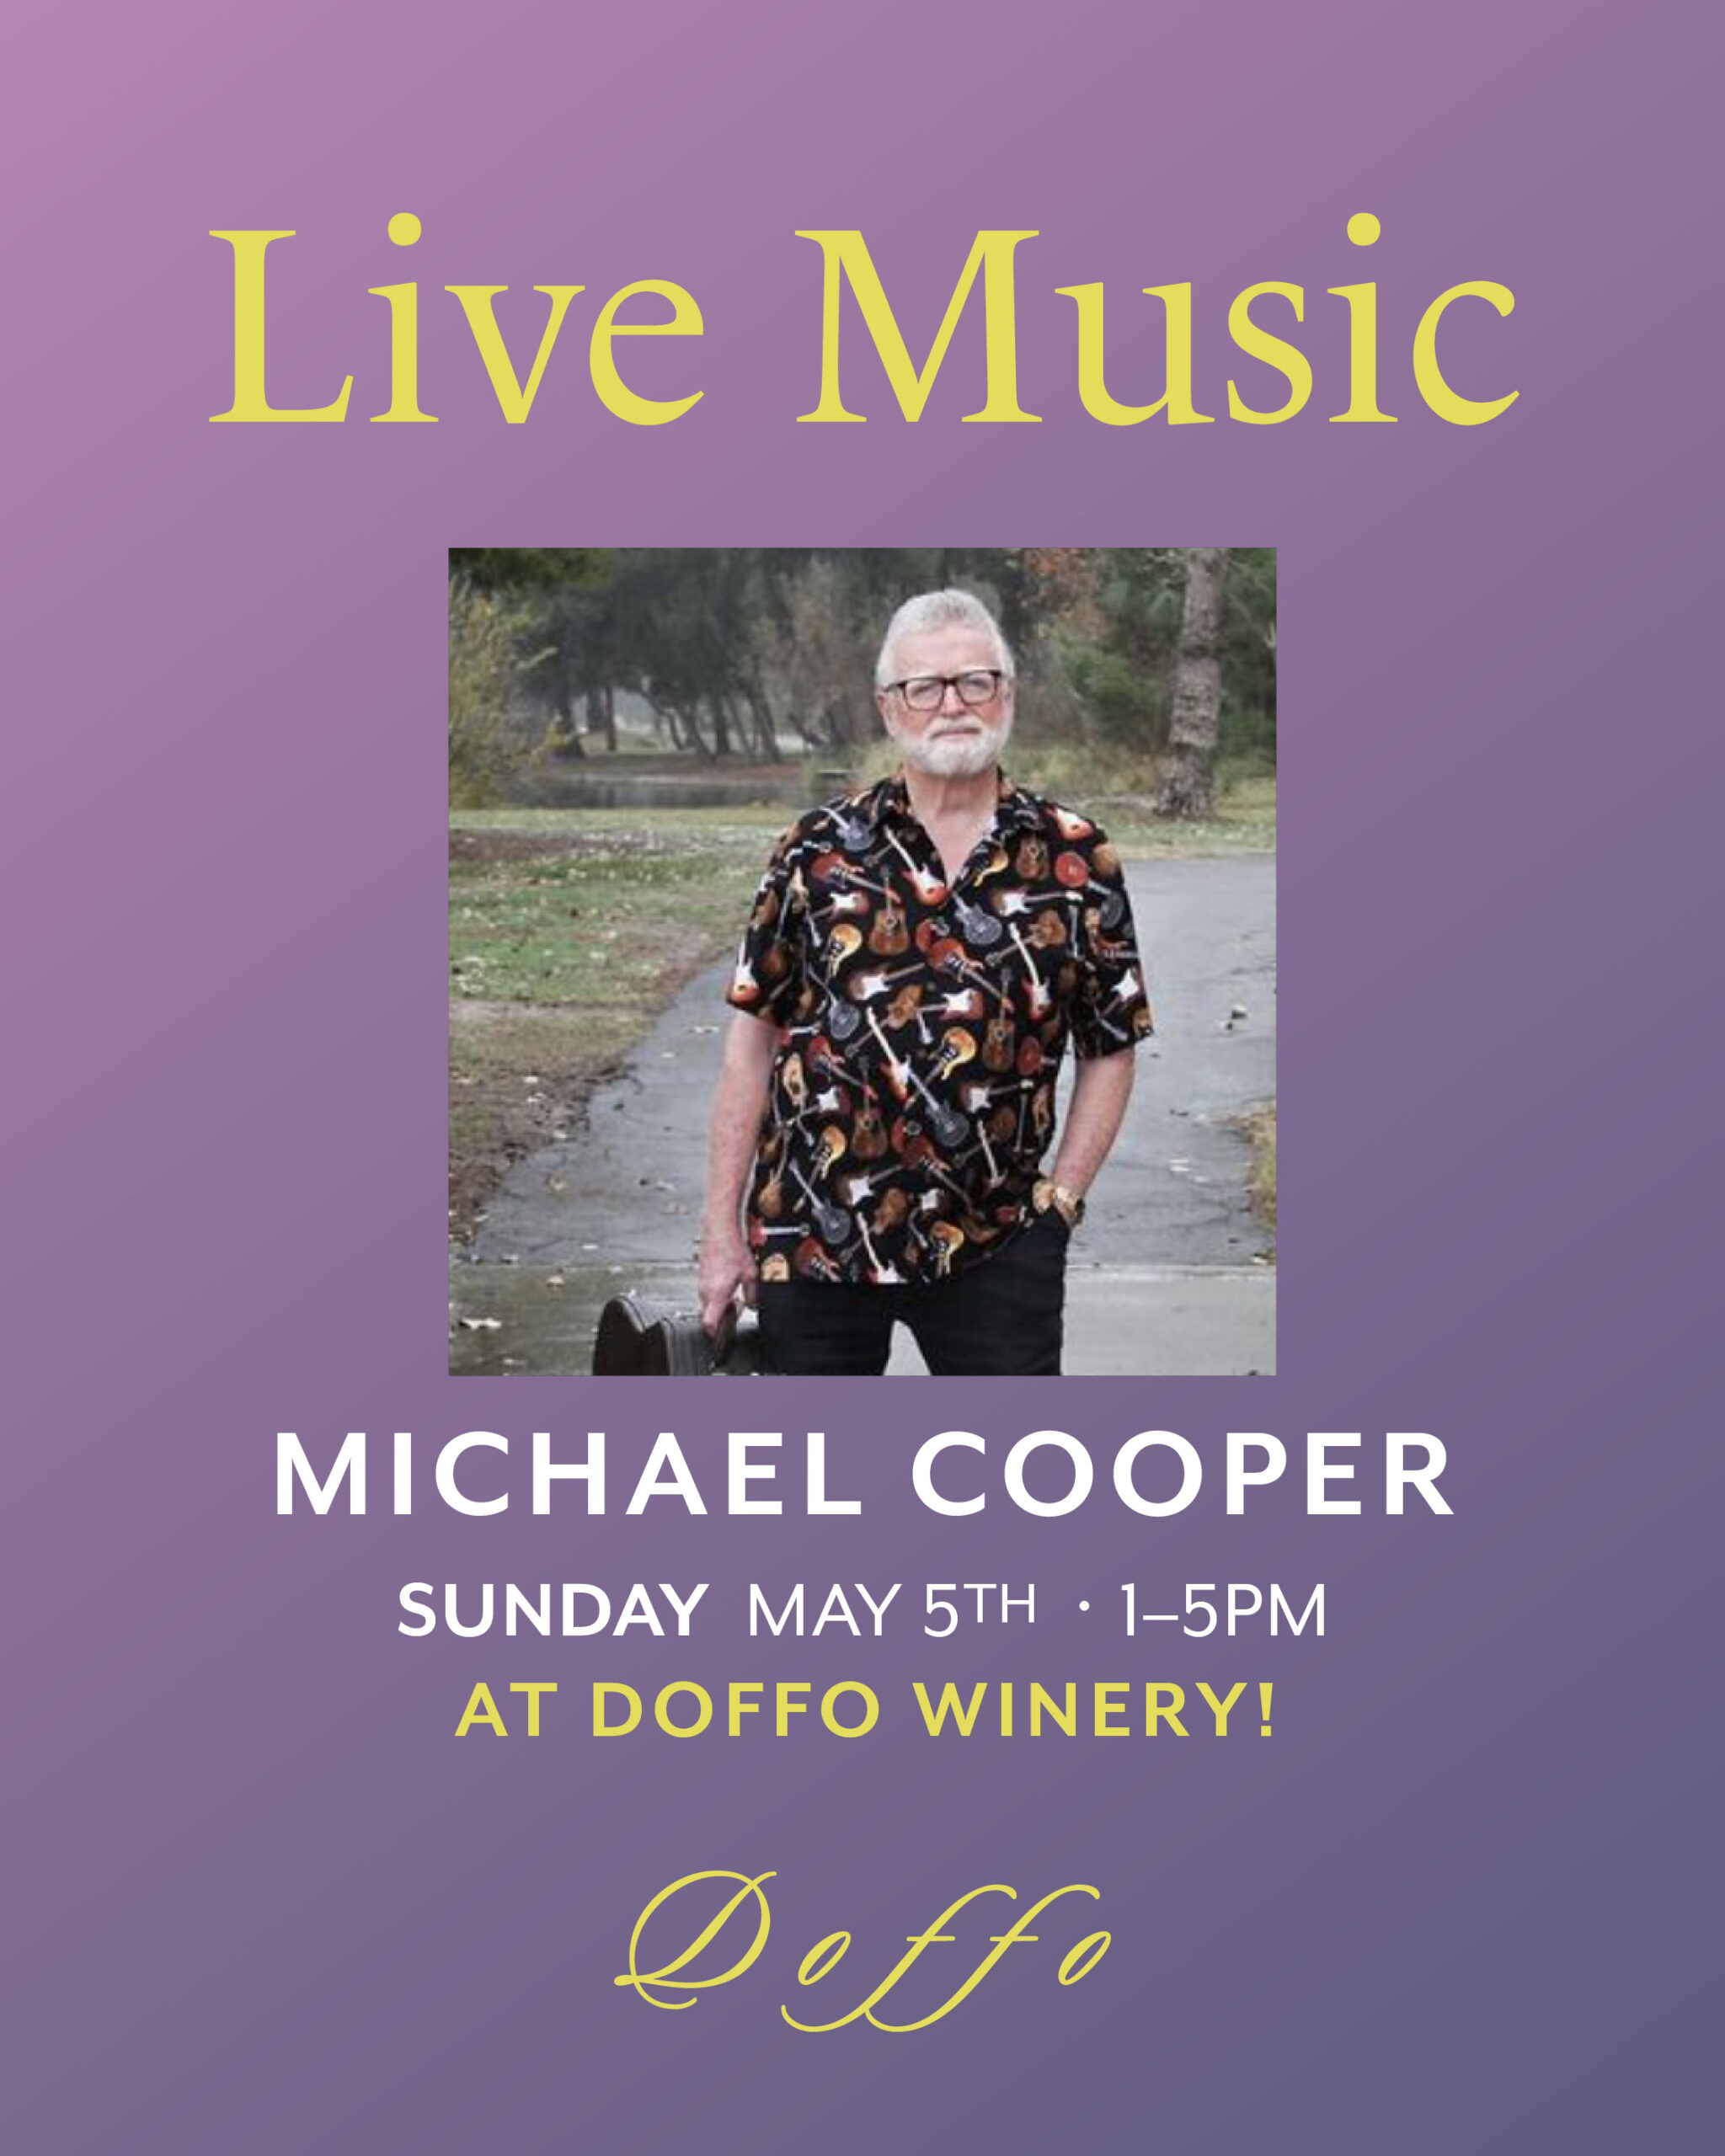 Live Music at the Doffo Winery | Michael Cooper